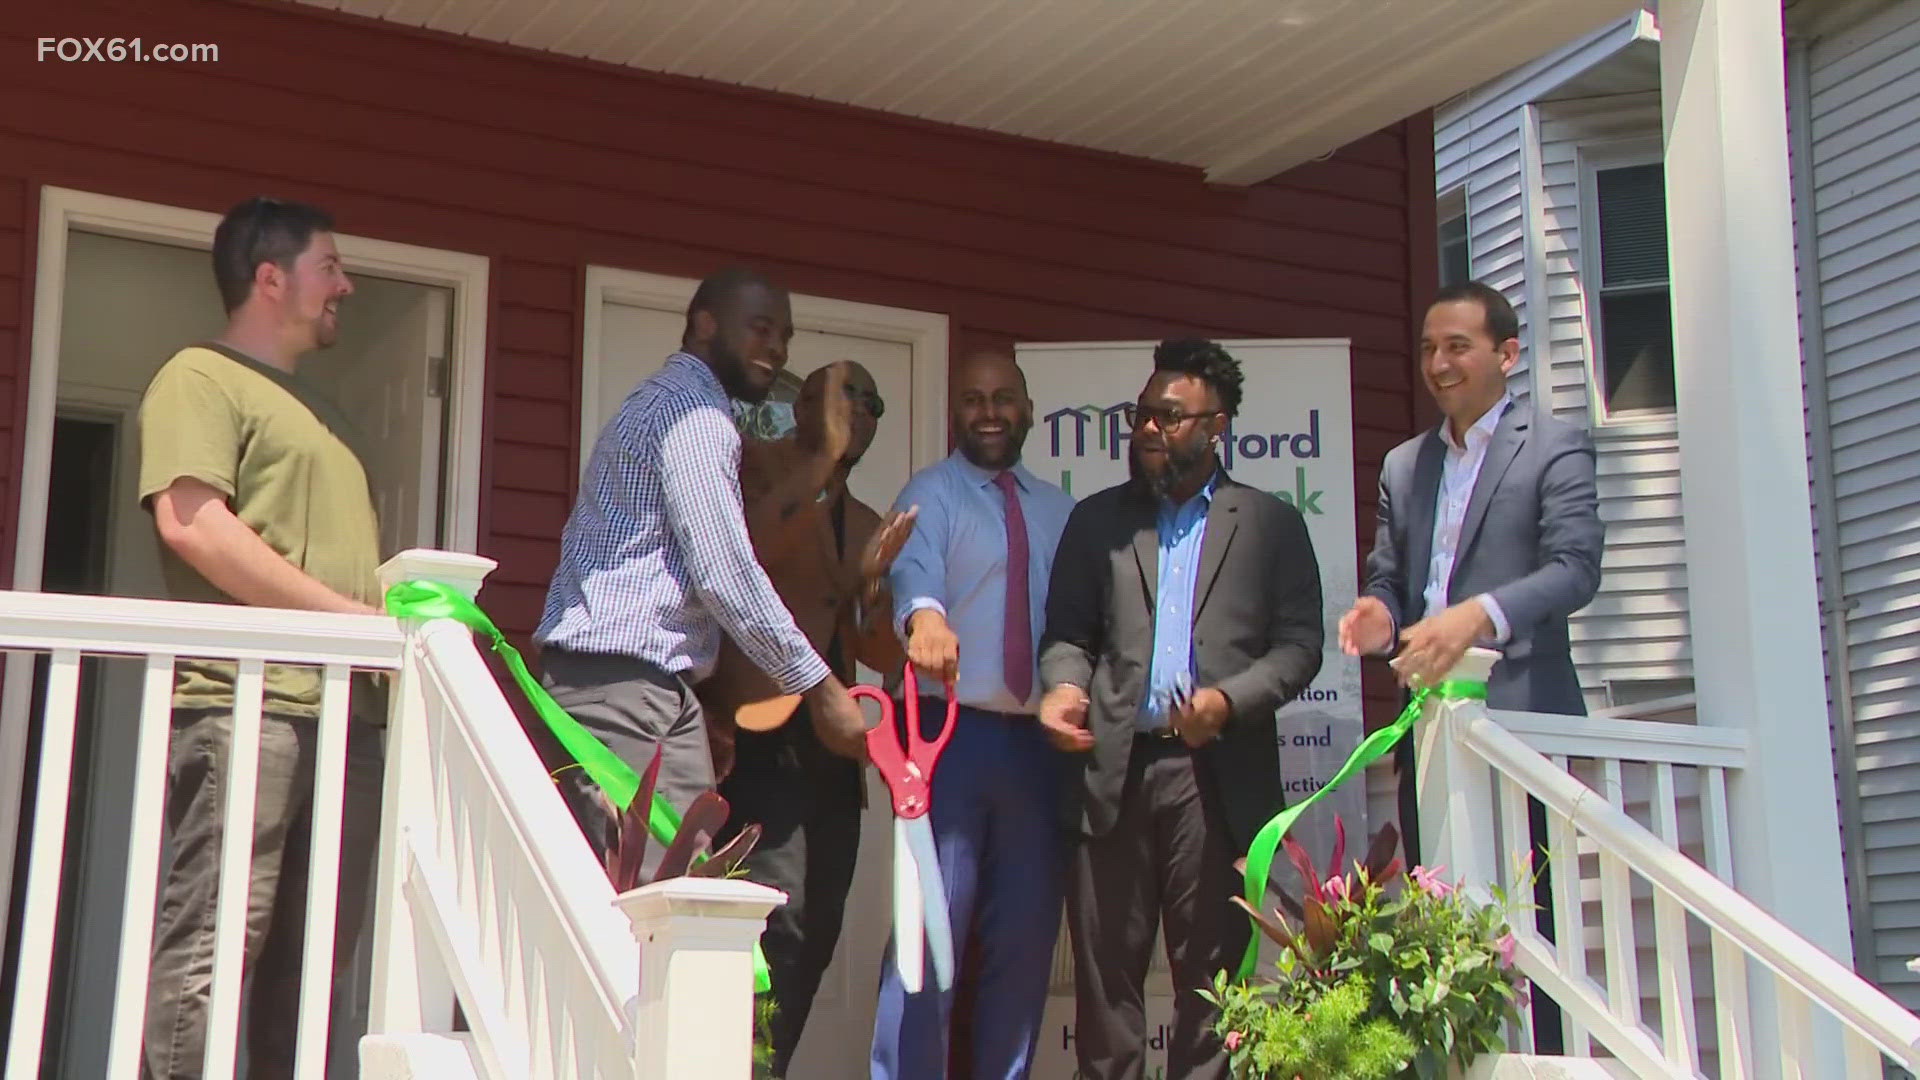 The Hartford Land Bank helped to fund and redevelop a dilapidated house into a three-family home.